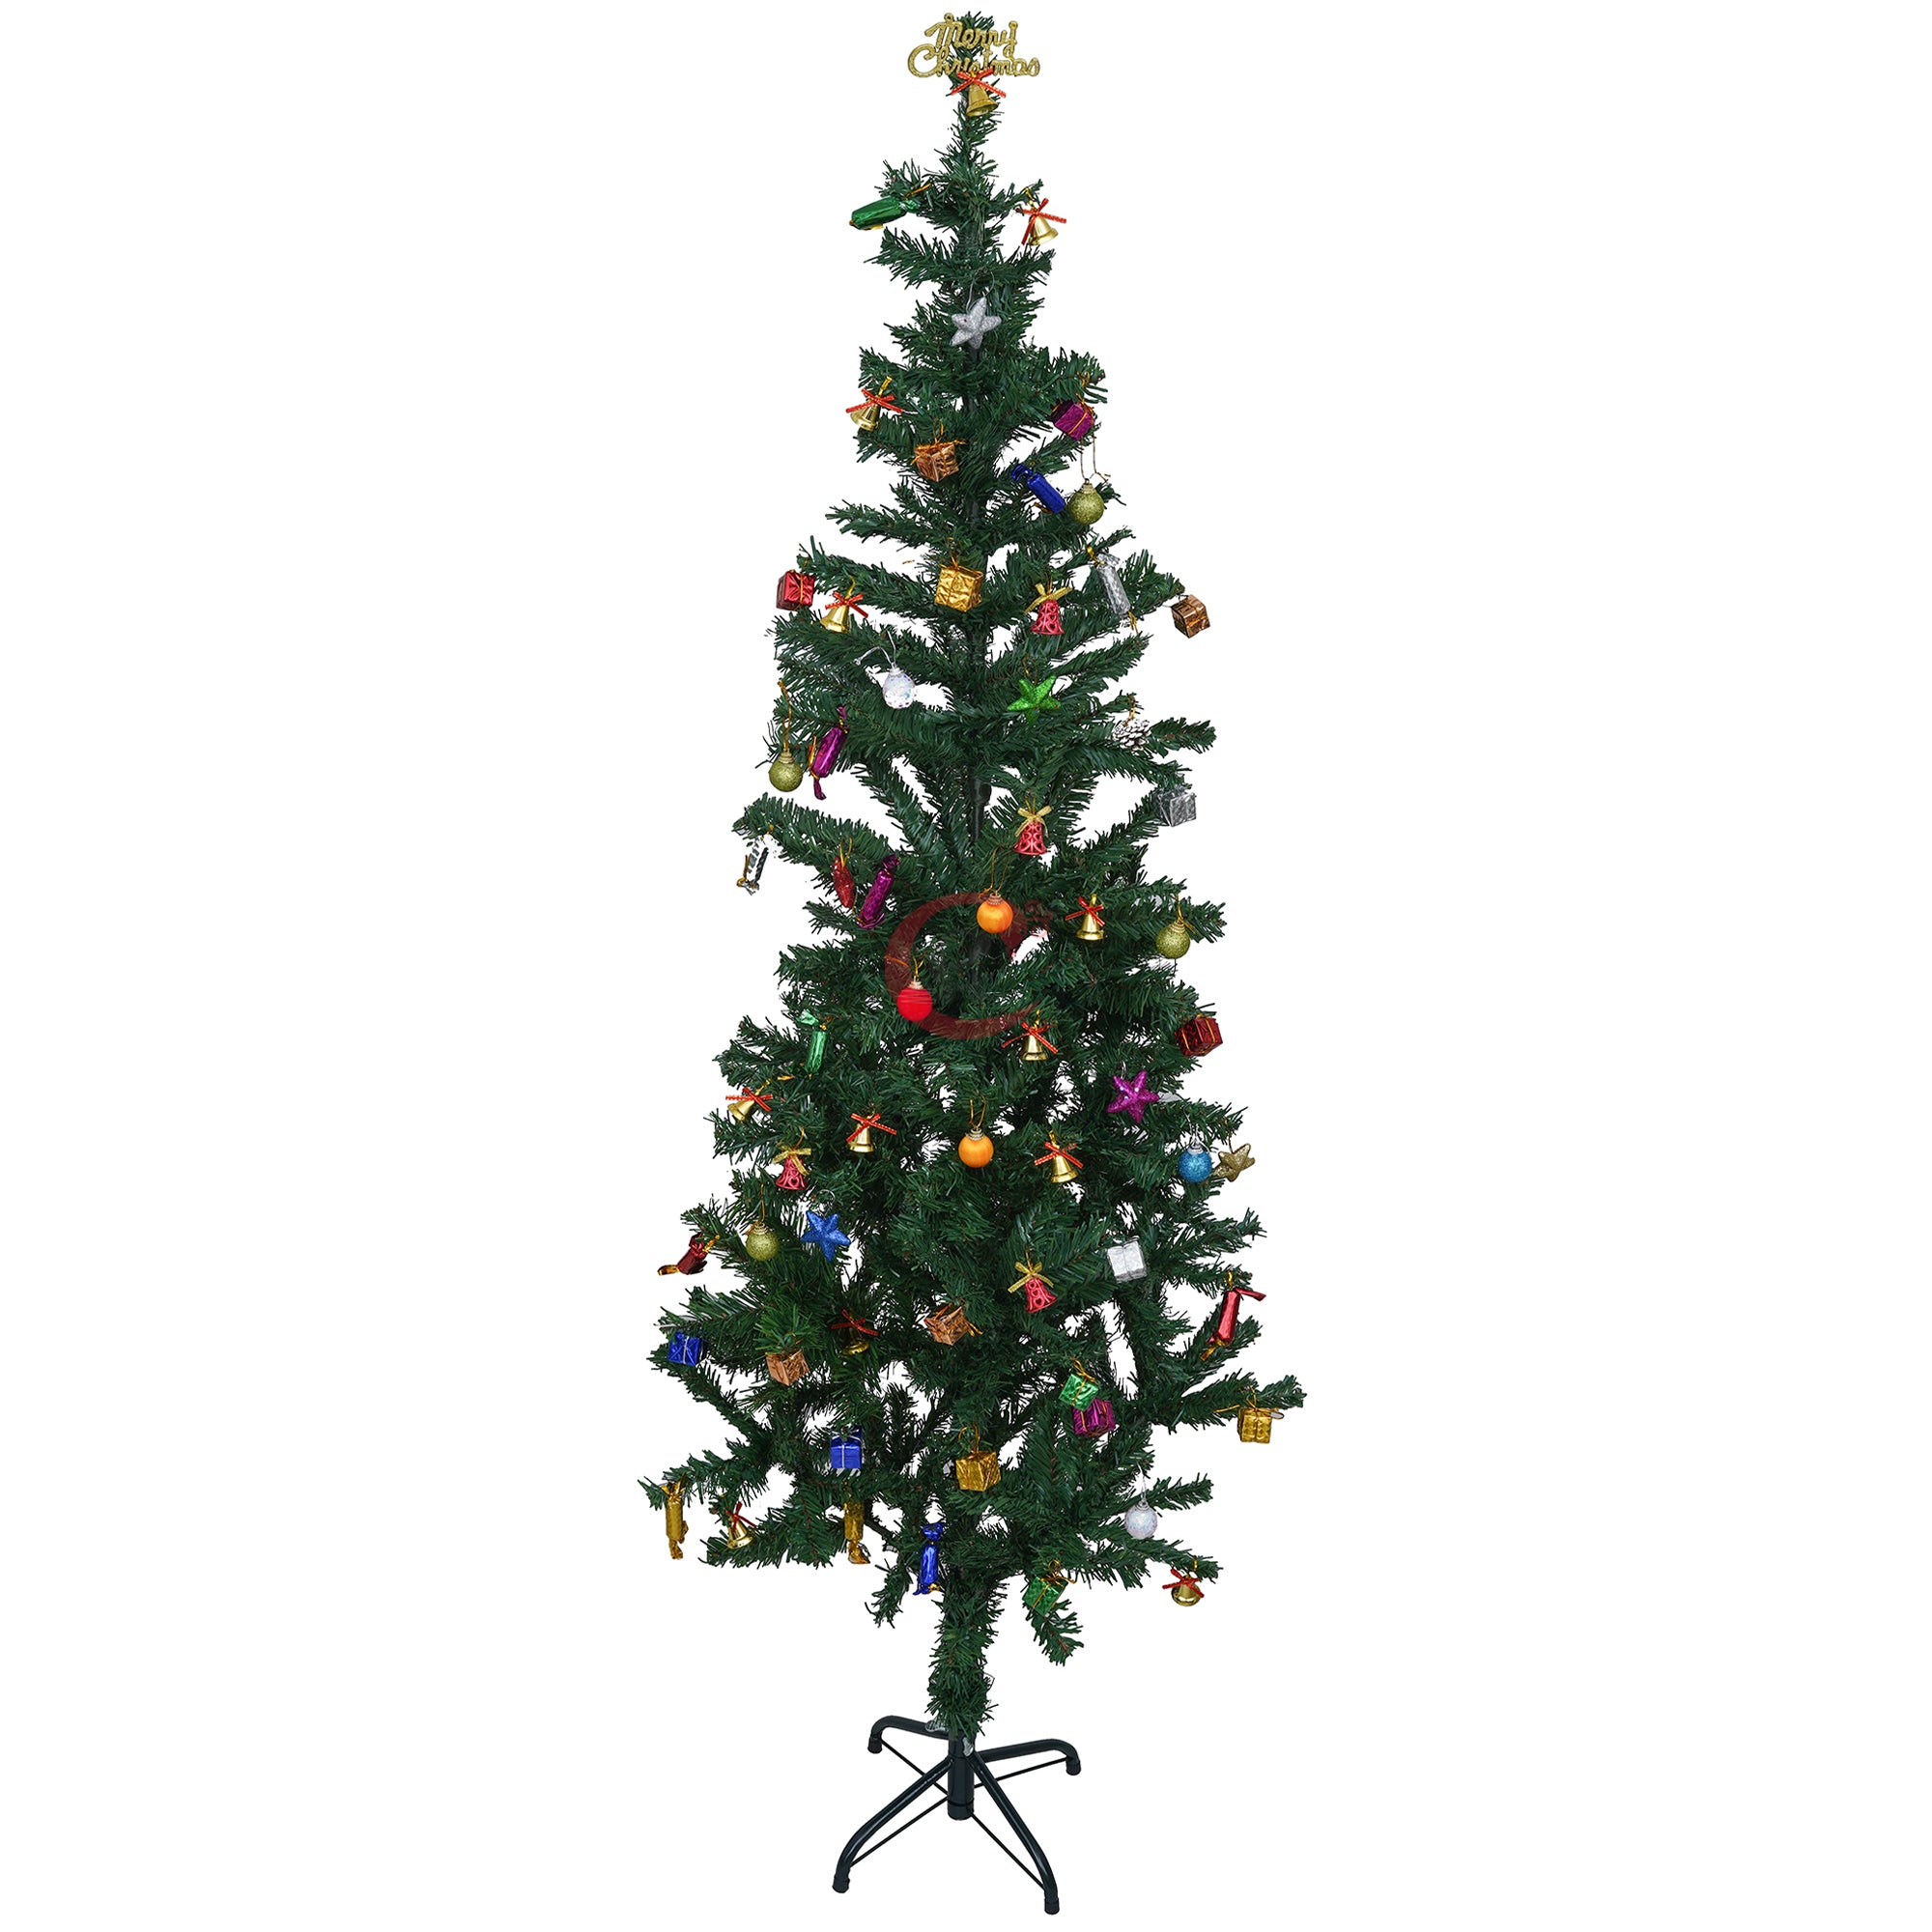 eCraftIndia 6 Feet Green Artificial Christmas Tree Xmas Pine Tree with Stand and 100 Christmas Decoration Ornaments Props - Merry Christmas Decoration Item for Home, Office, and Church 6